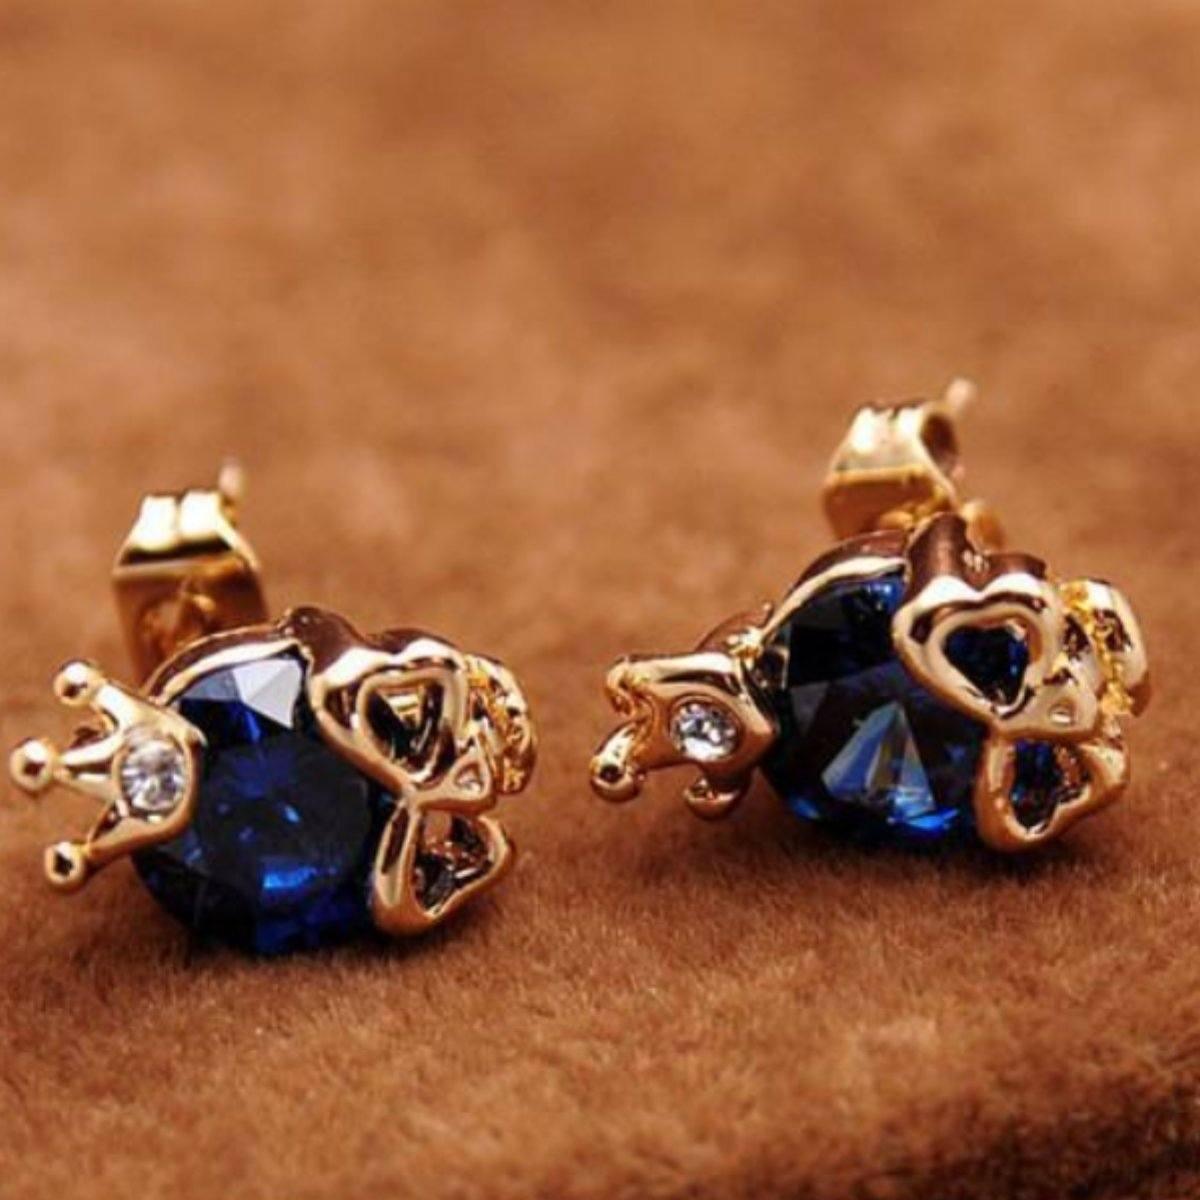 A pair of Woman's Gold Plated Skull Cubic Zircon Stud Earrings with blue crystals.